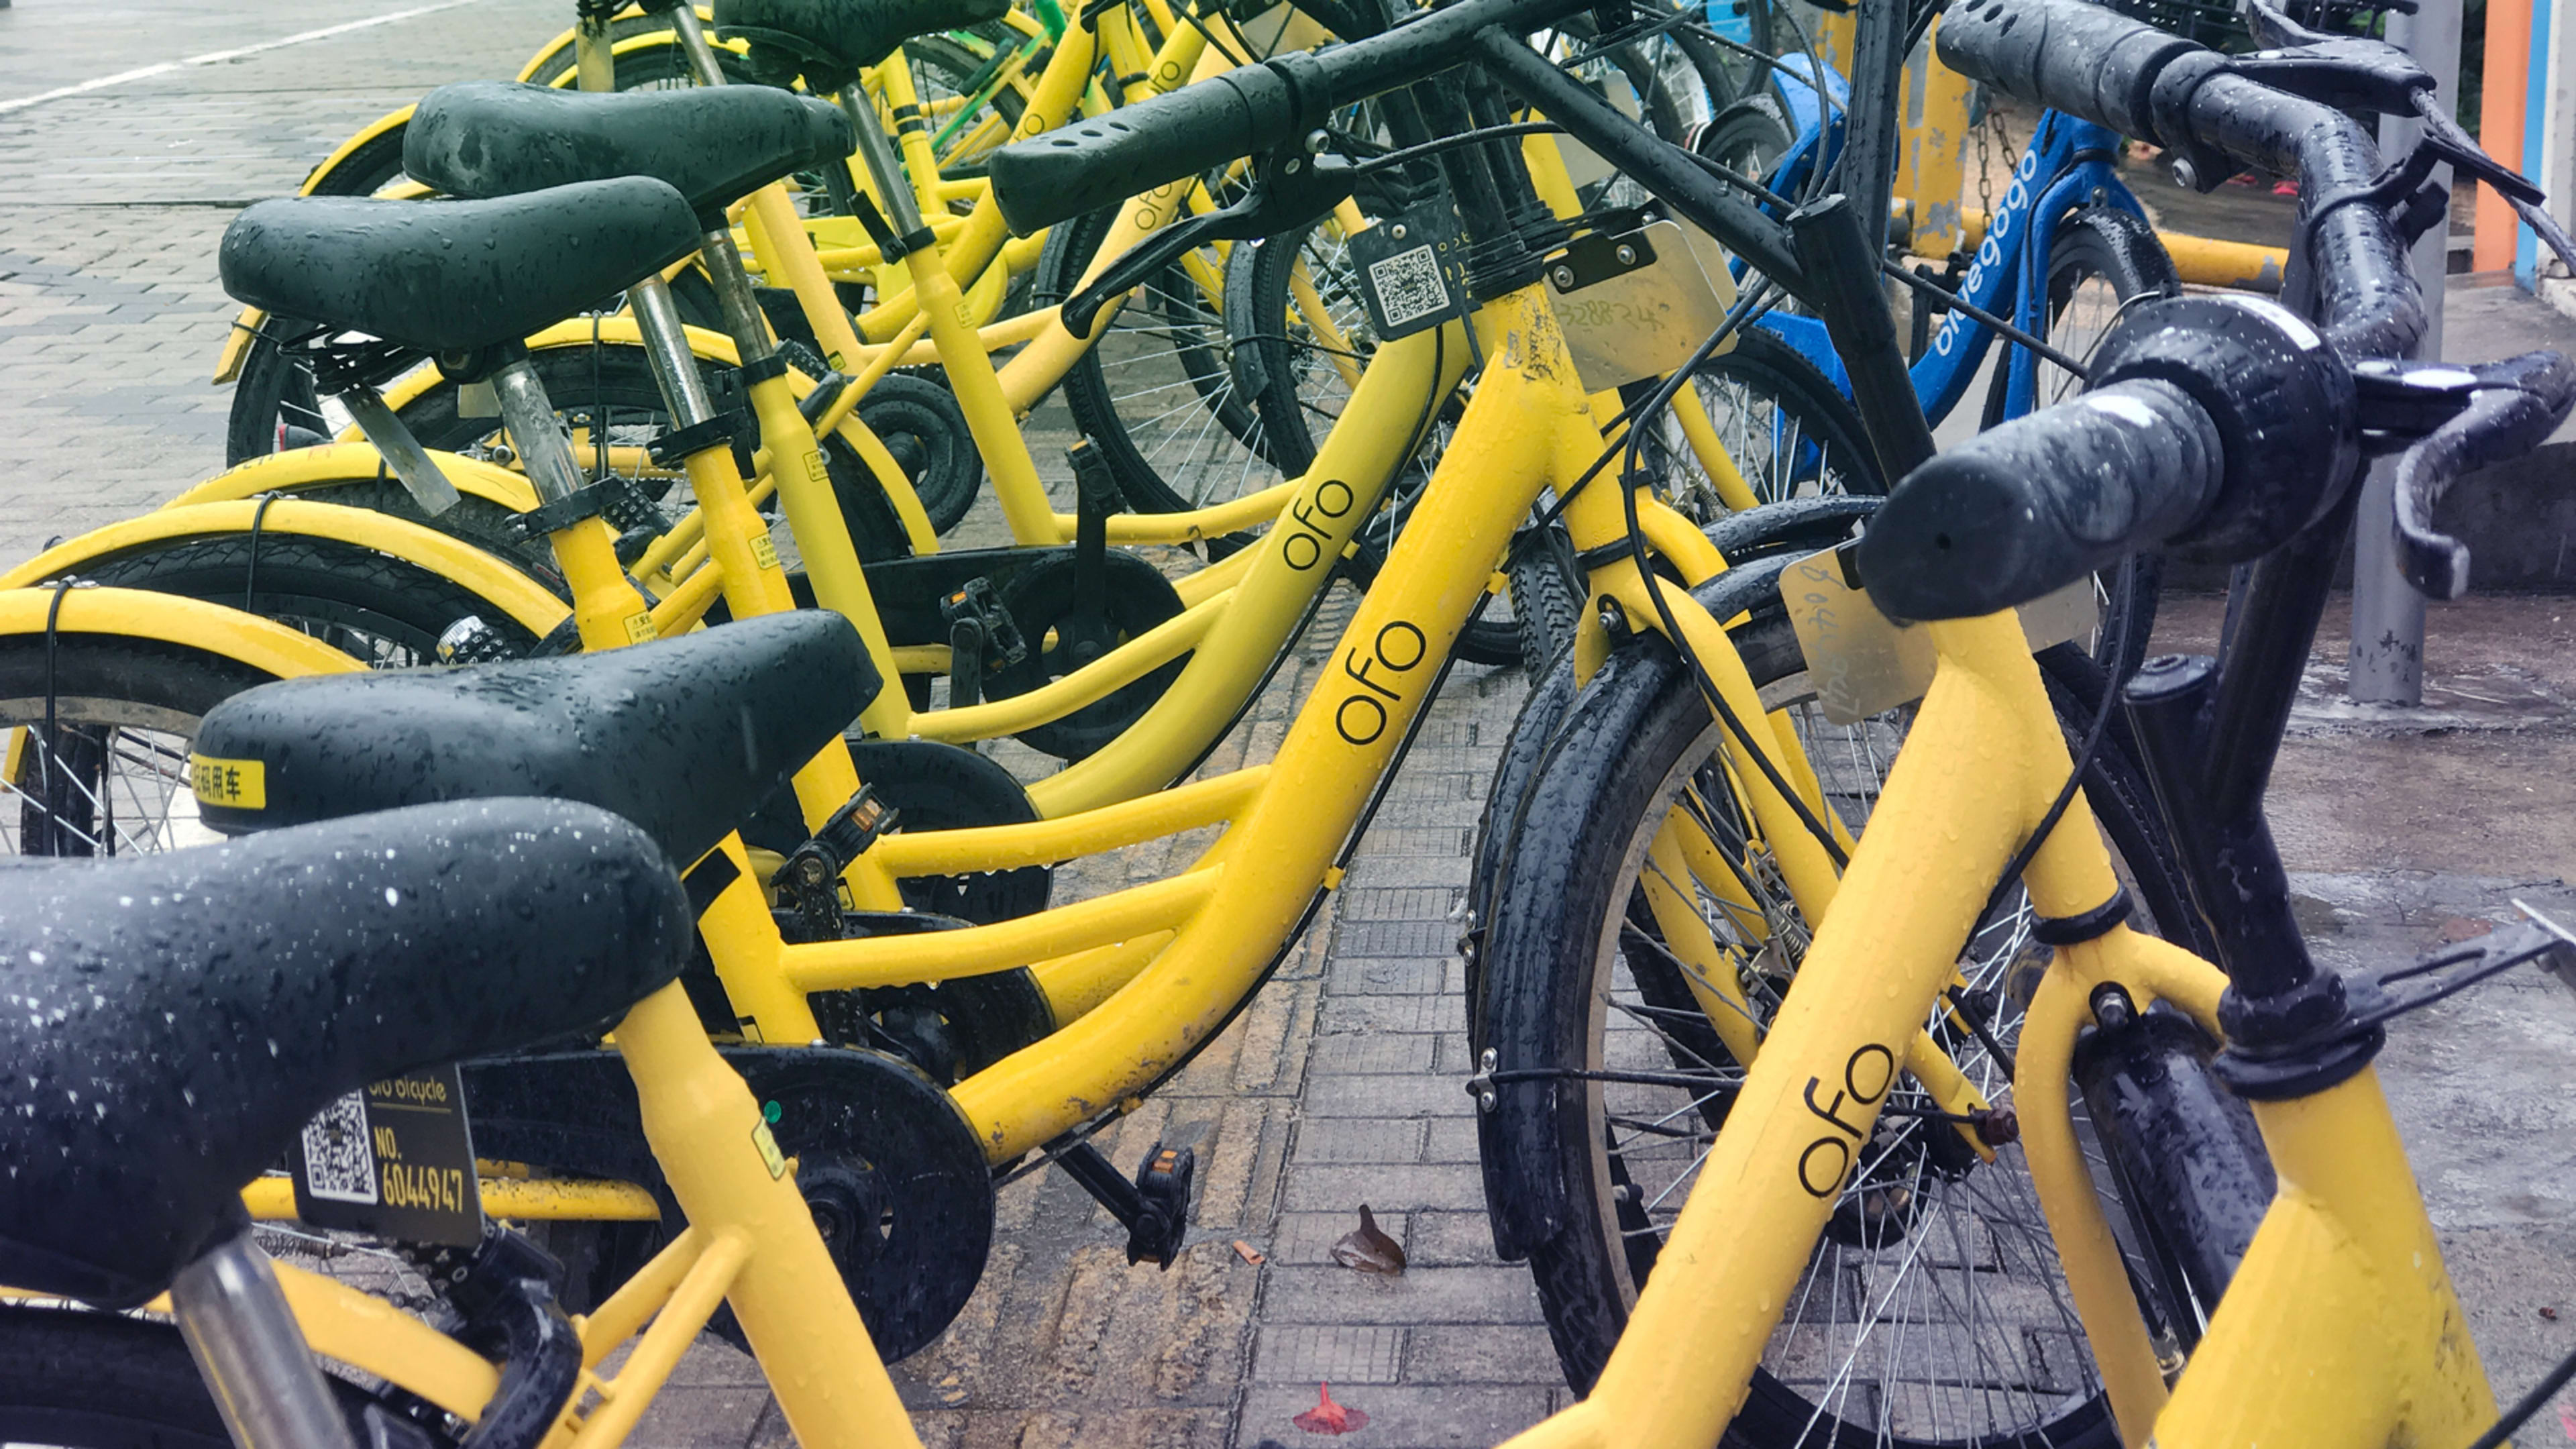 Chinese bikeshare company Ofo is laying off most of its U.S. staff